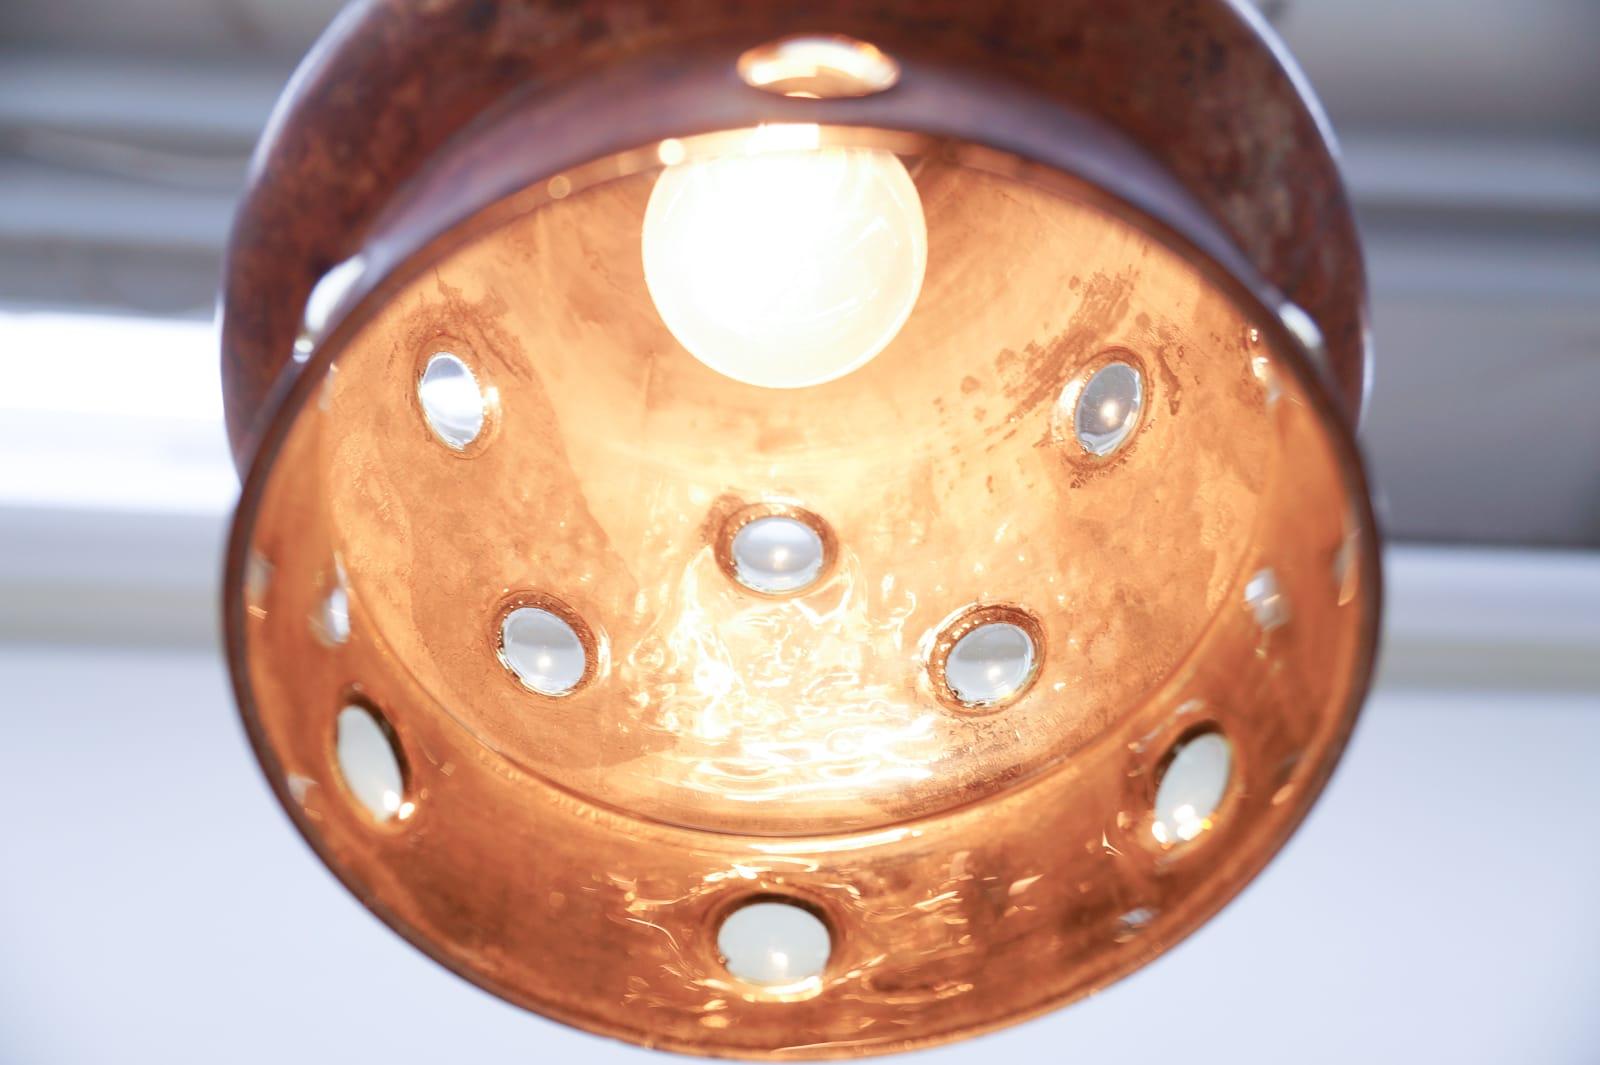 Pair Elegant Mid-Century Modern Copper and Glass Bubbles Pendant Lamp, 1960s For Sale 1